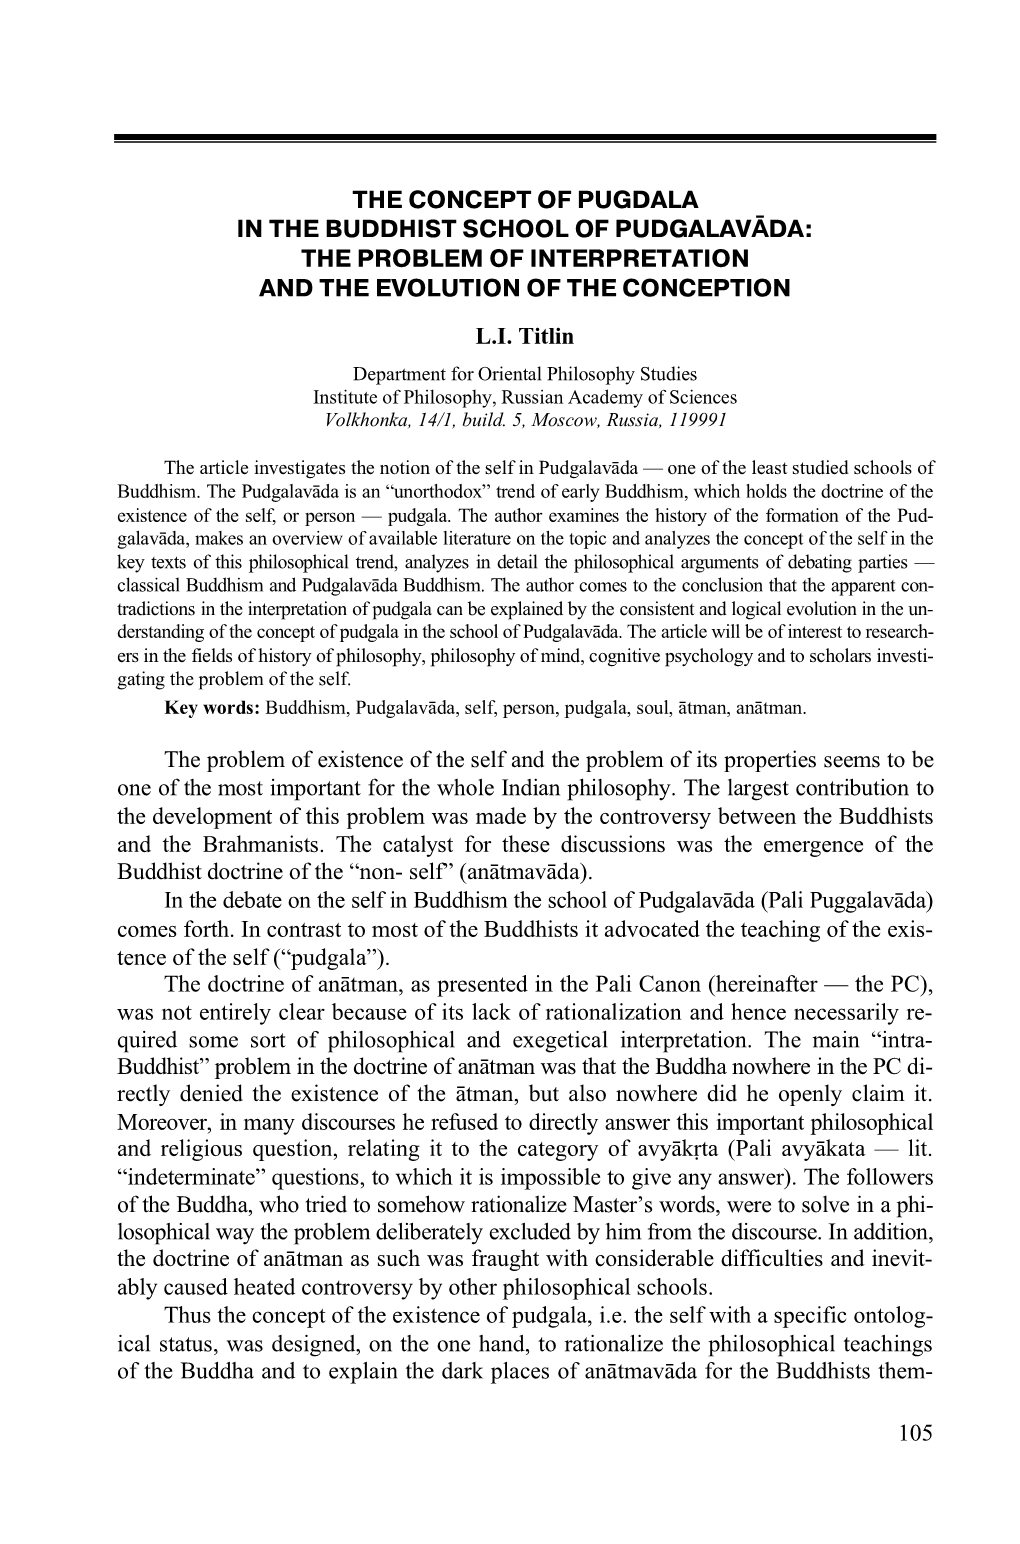 The Concept of Pugdala in the Buddhist School of Pudgalavāda: the Problem of Interpretation and the Evolution of the Conception